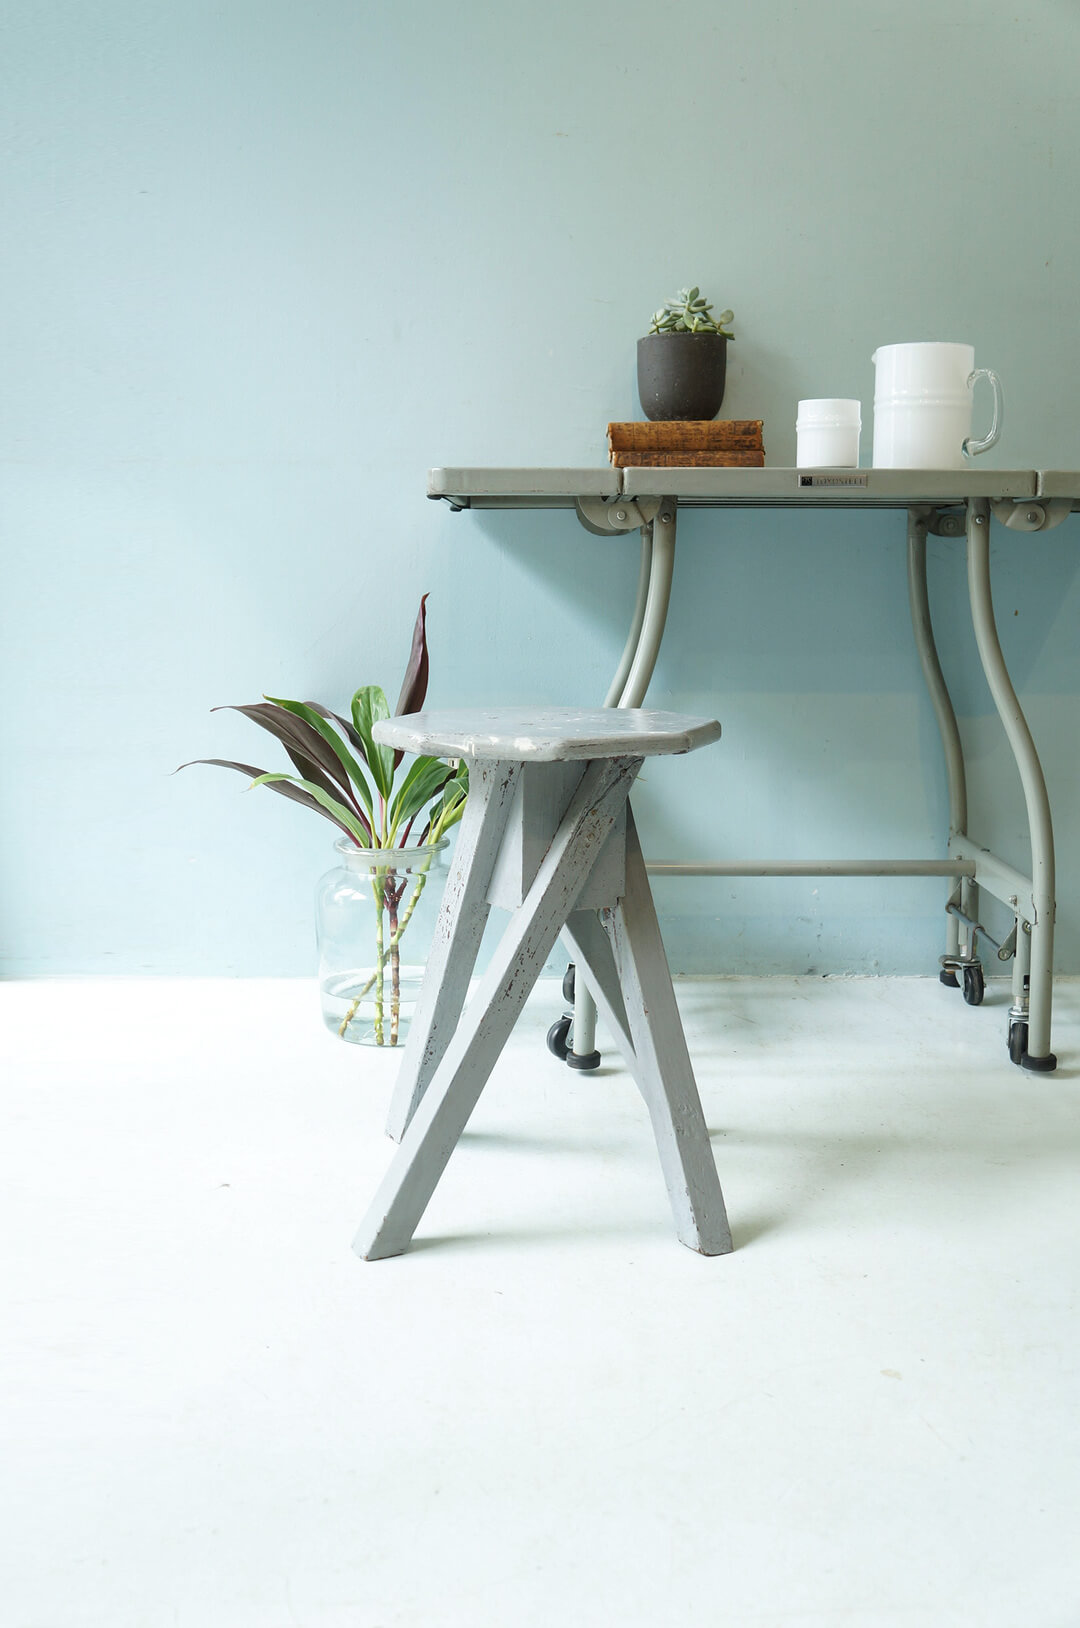 Vintage Octagon Atelier Stool Painted Gray/ヴィンテージ 八角形アトリエスツール 椅子 グレーペイント シャビーシック